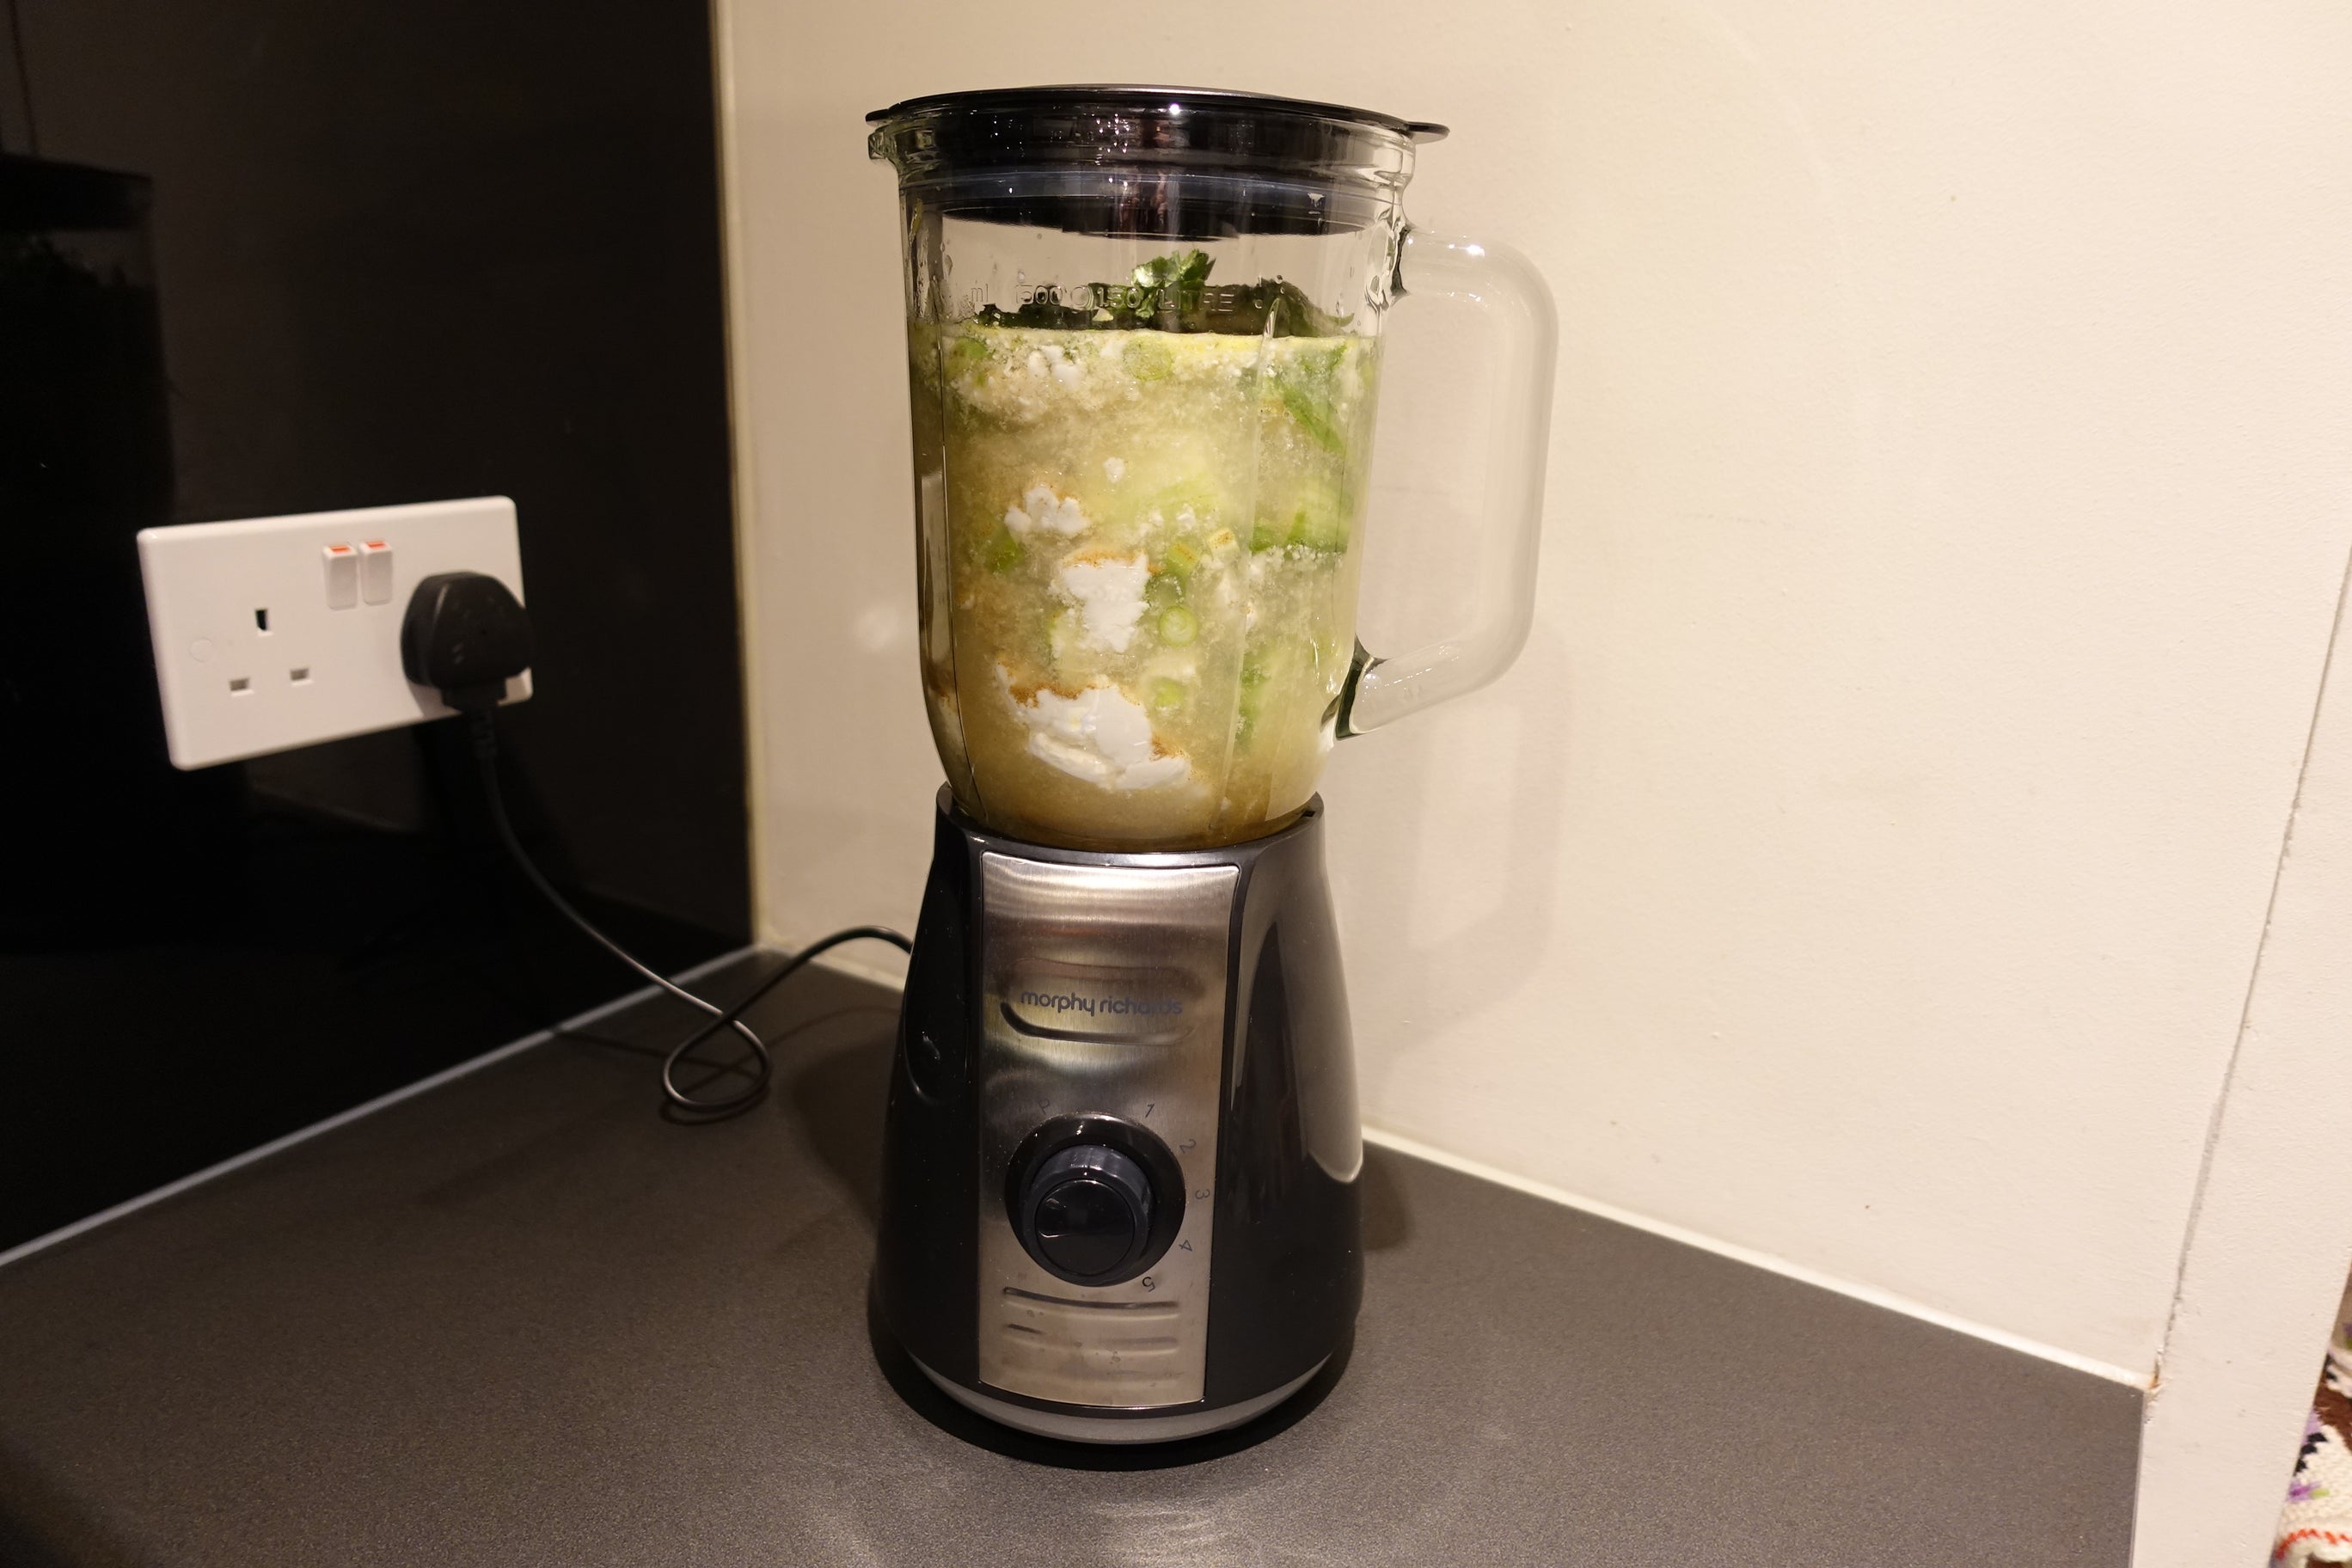 Morphy Richards 403010 Total Control Blender with ingredients to make soup in